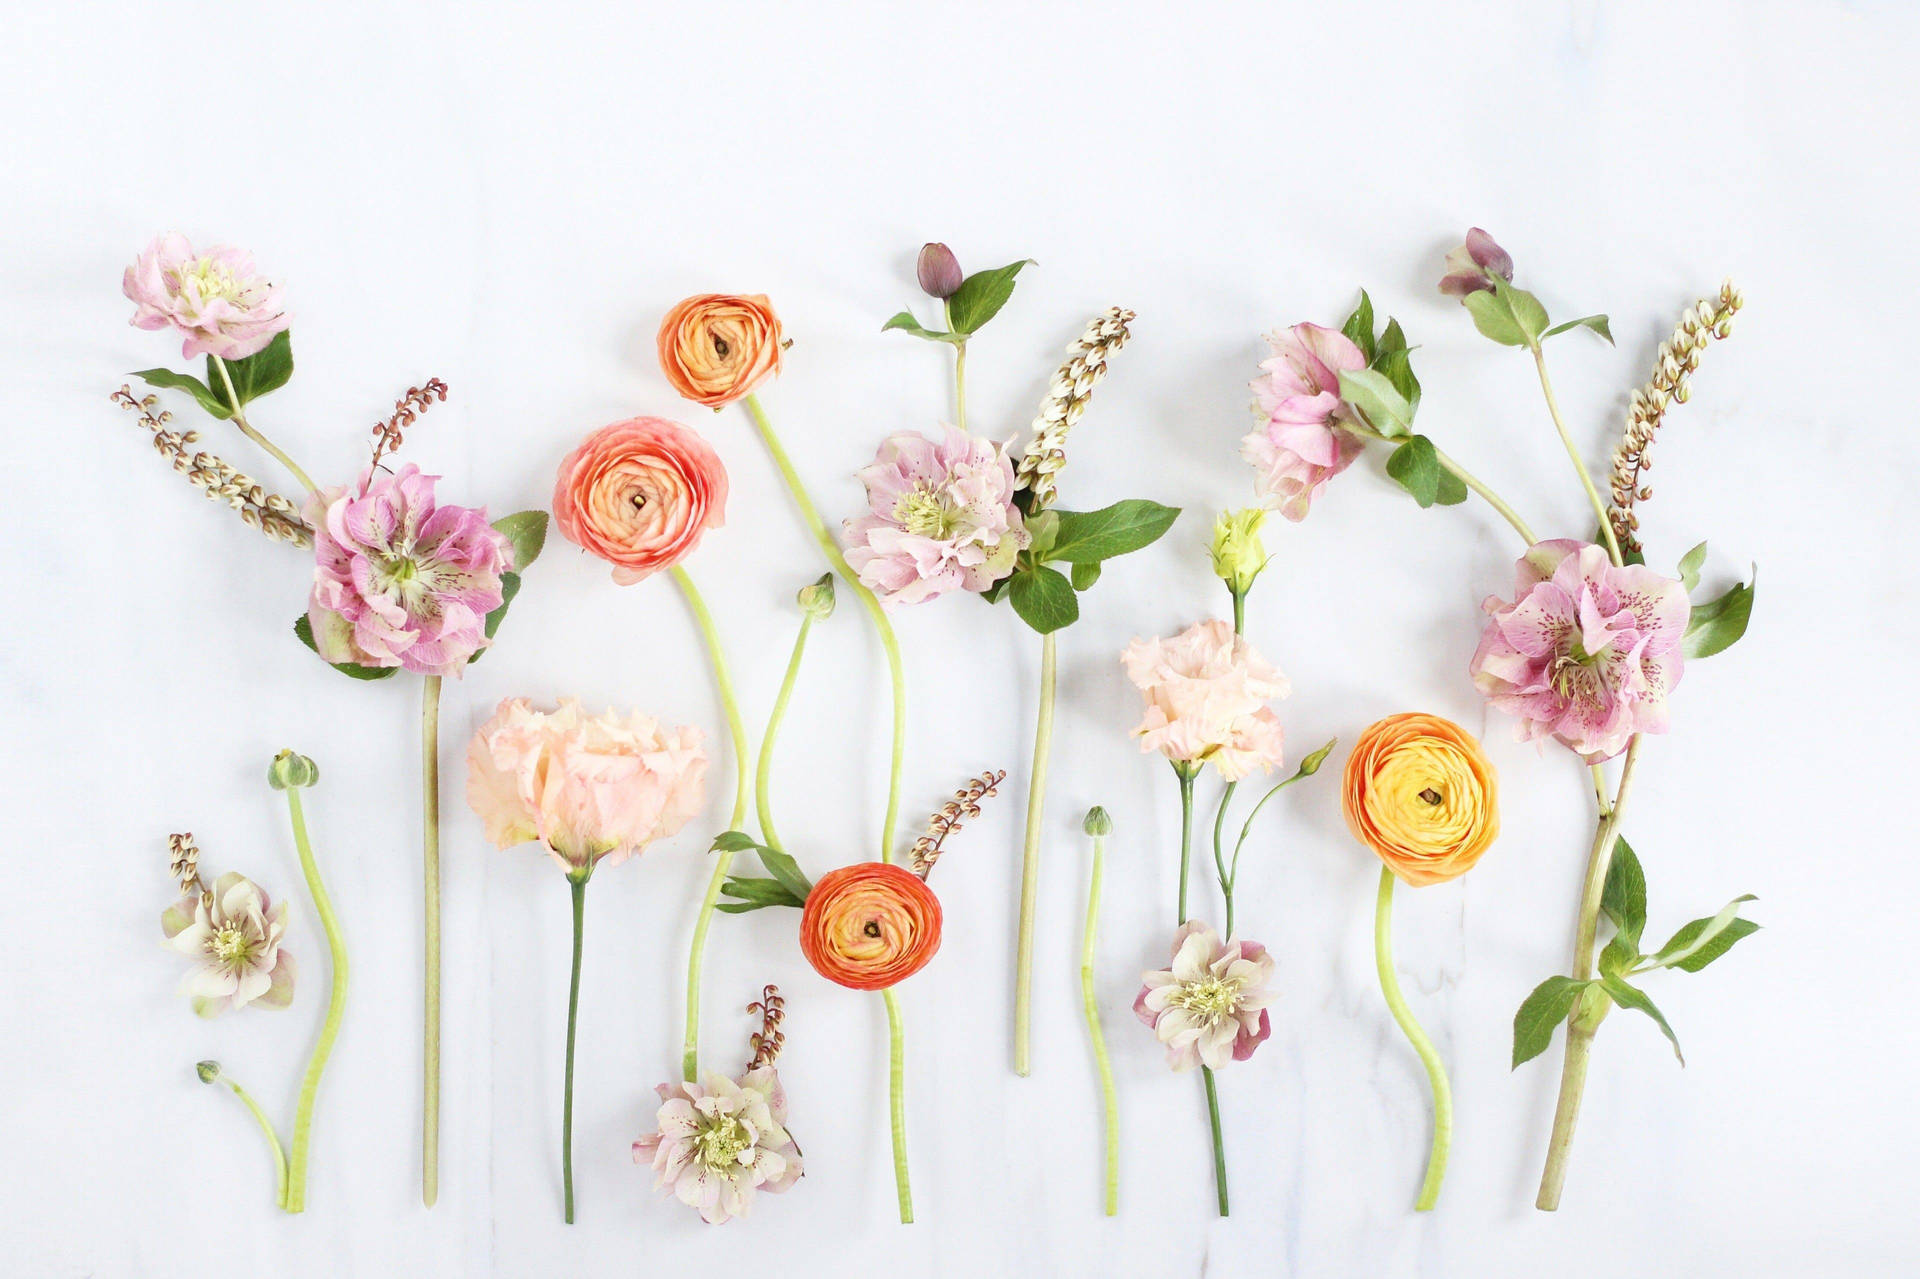 Cute Spring Round Flowers Background